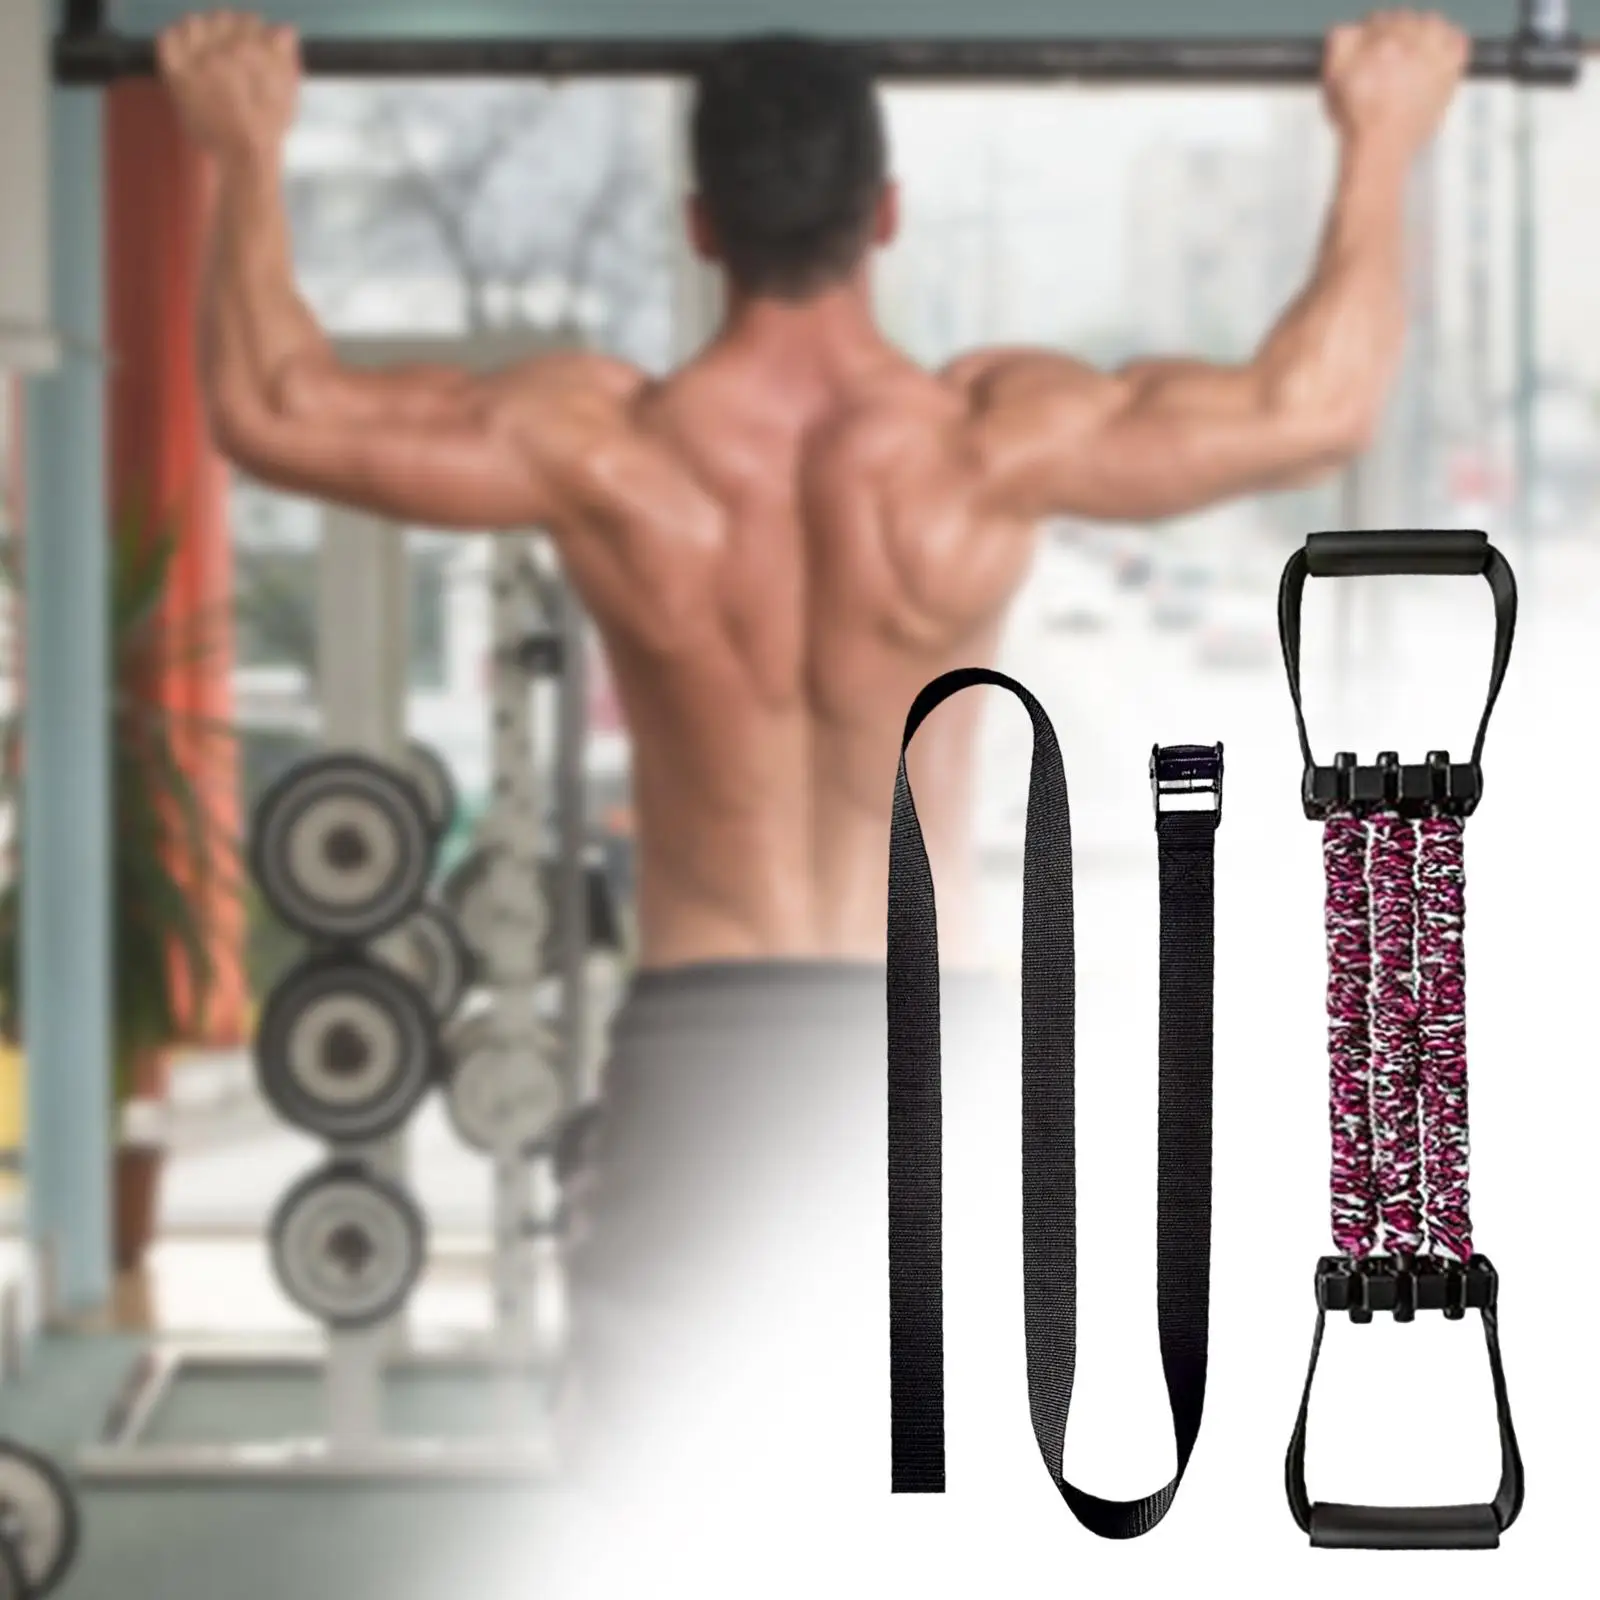 Chin up Assist Band System Chin Up Adjustable for Exercise Training Equipment Improve Arm, Shoulders and Chest Strength